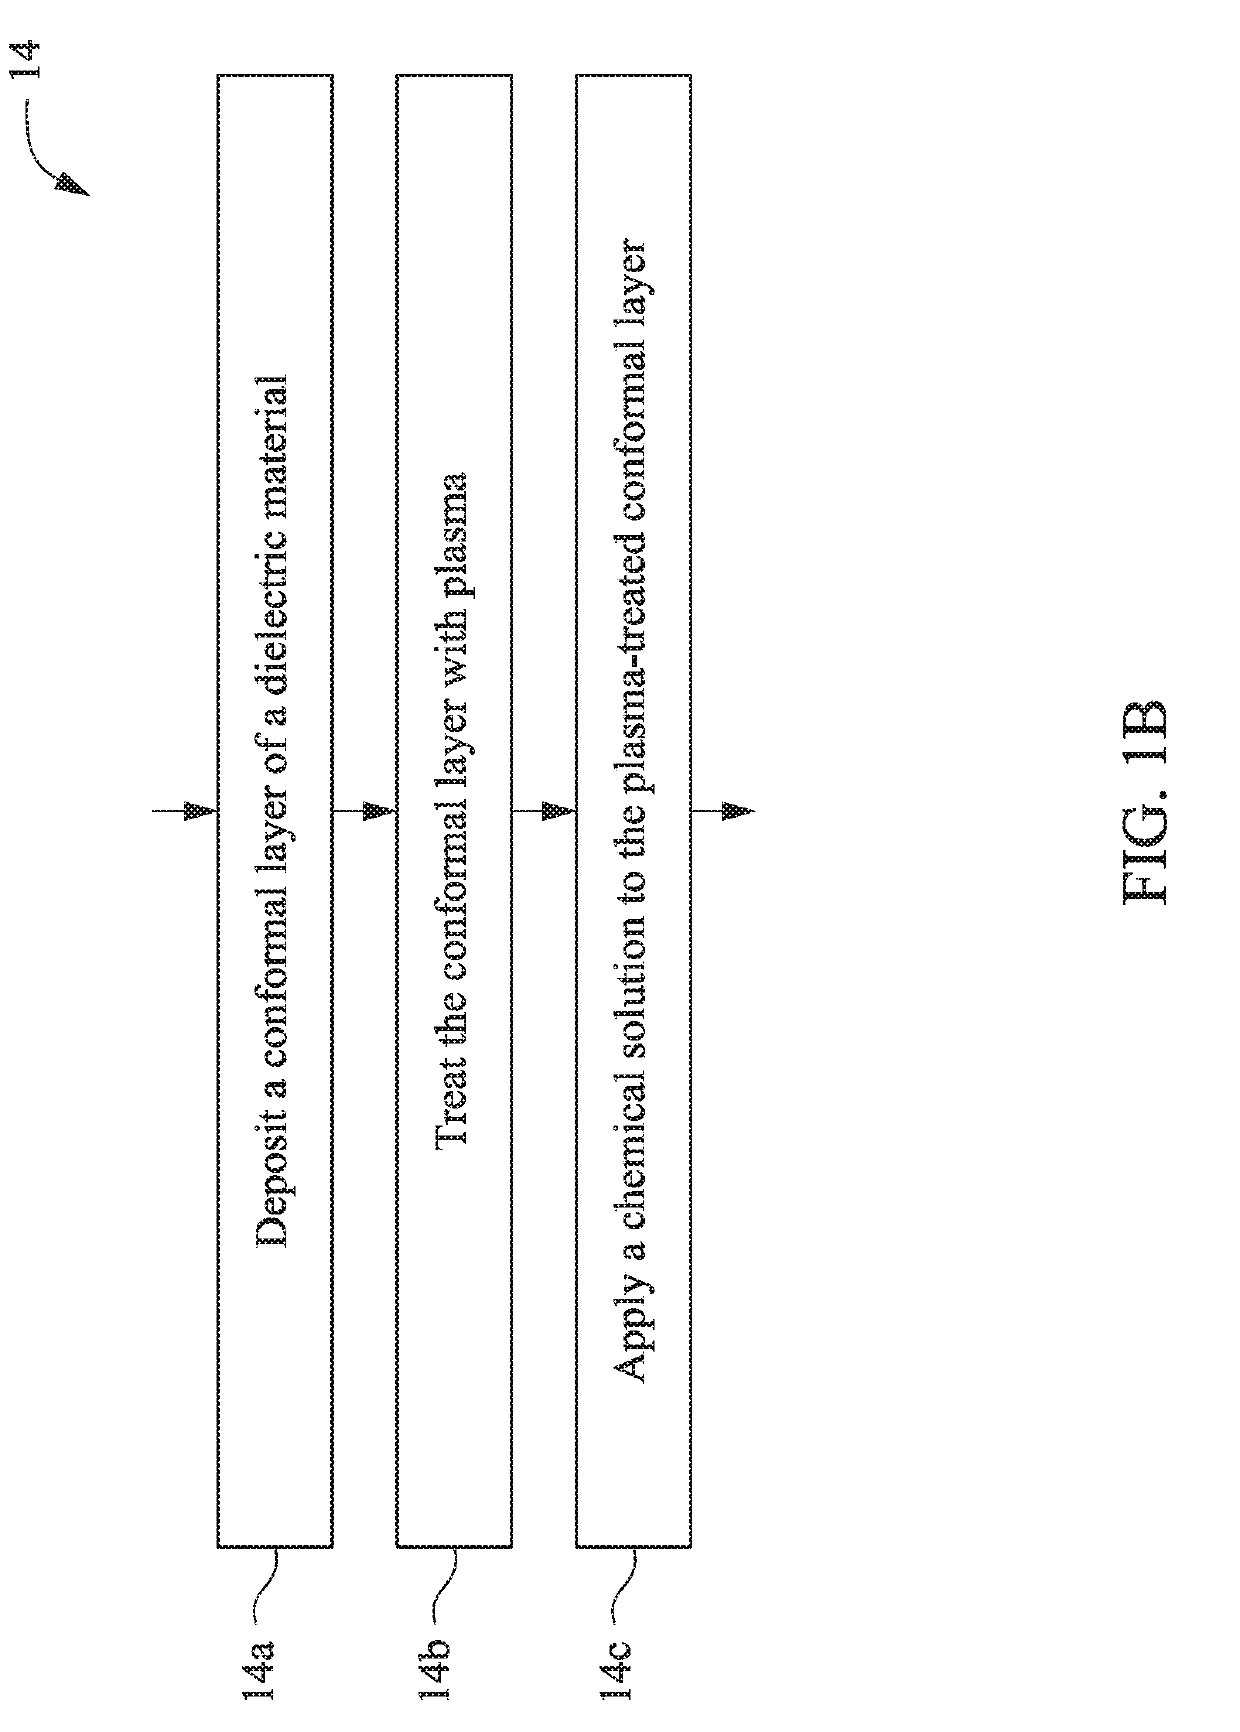 Methods for Reducing Contact Depth Variation in Semiconductor Fabrication